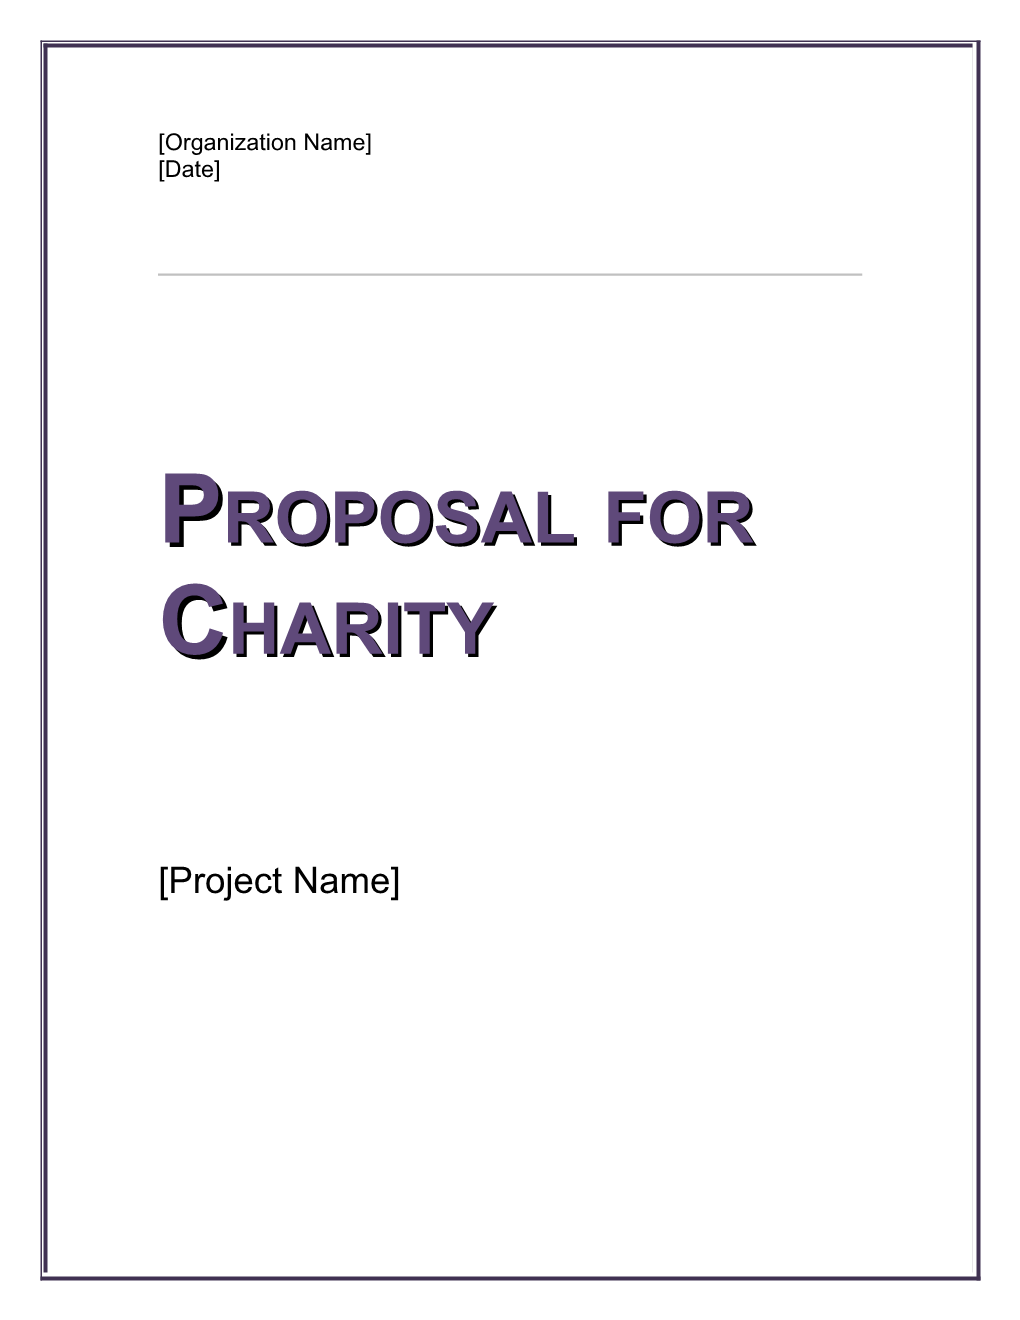 Proposal for Charity